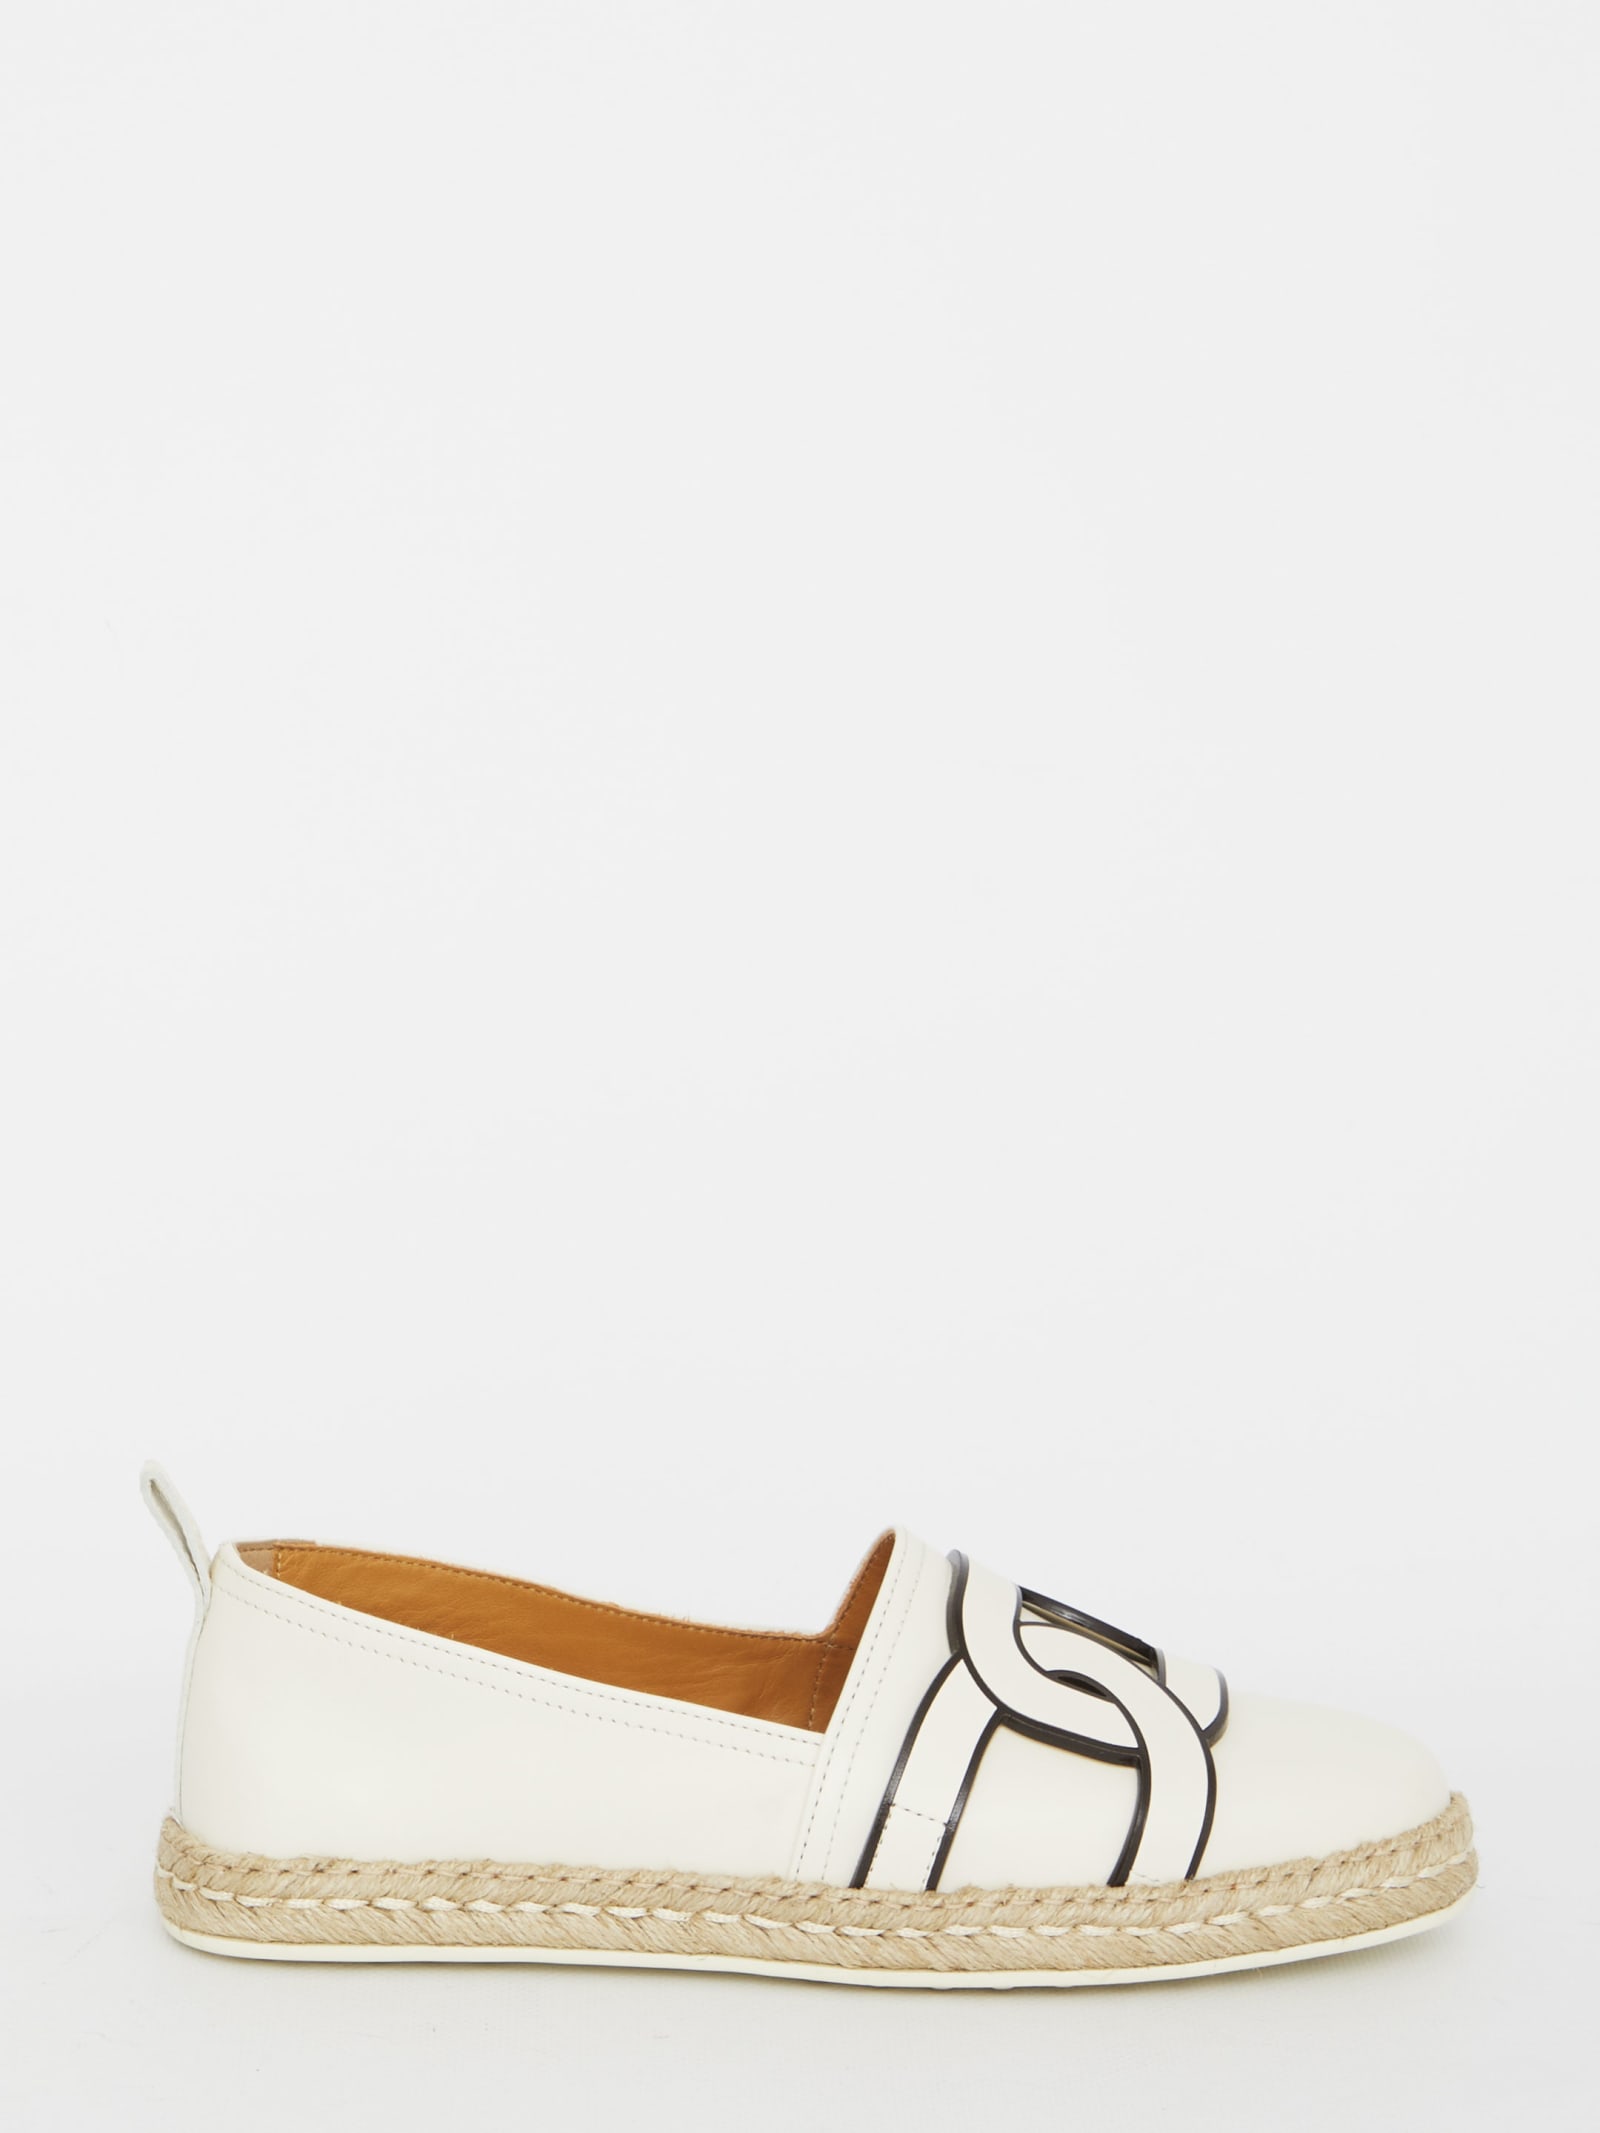 TOD'S KATE LEATHER ESPADRILLES